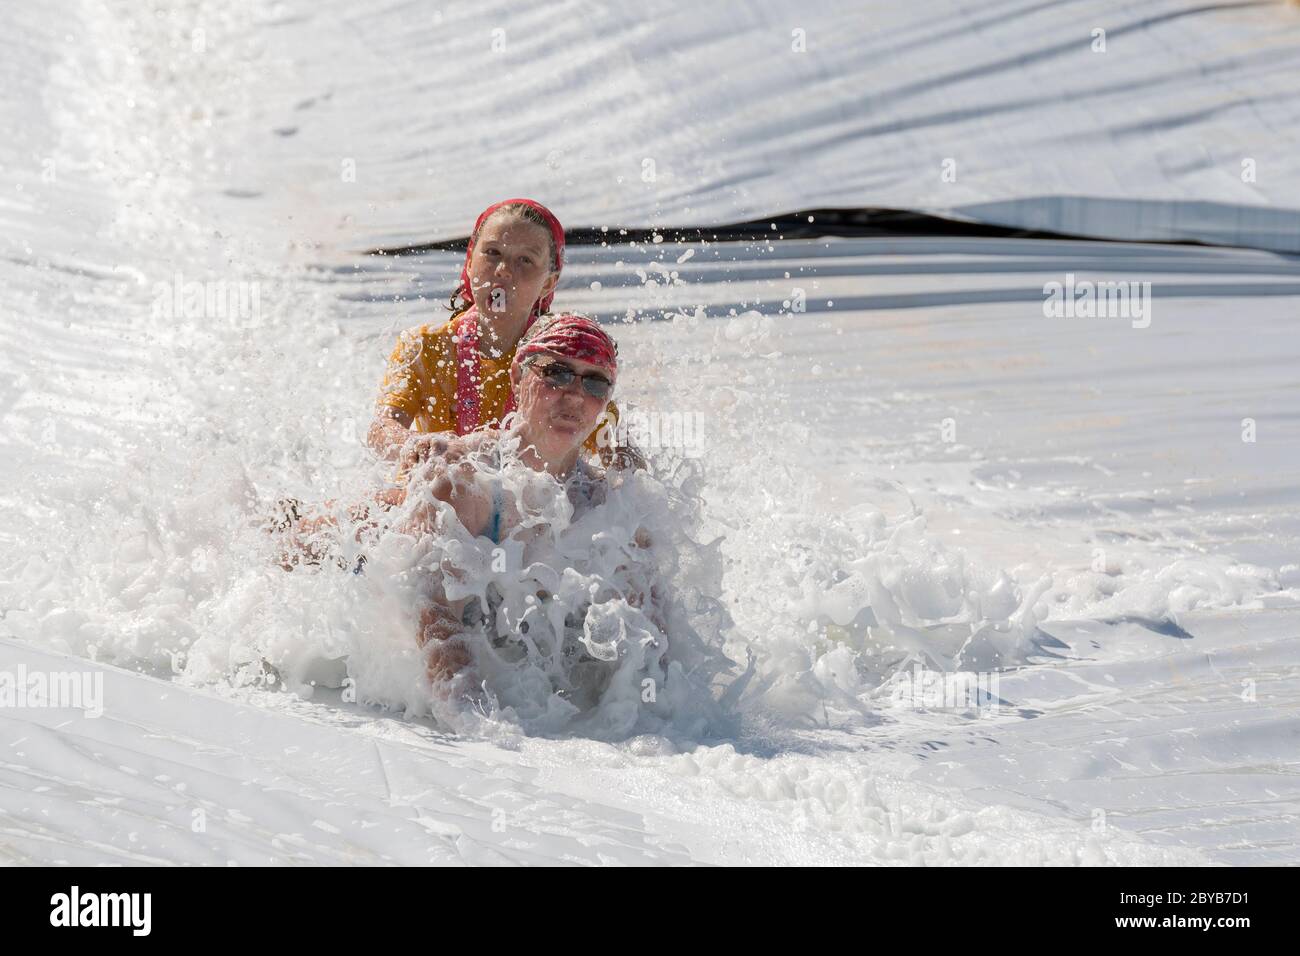 Poley Mountain, New Brunswick, Canada - June 10, 2017: Participating in the annual fundraiser 'Mud Run For Heart'. A woman and child slide down a foam Stock Photo